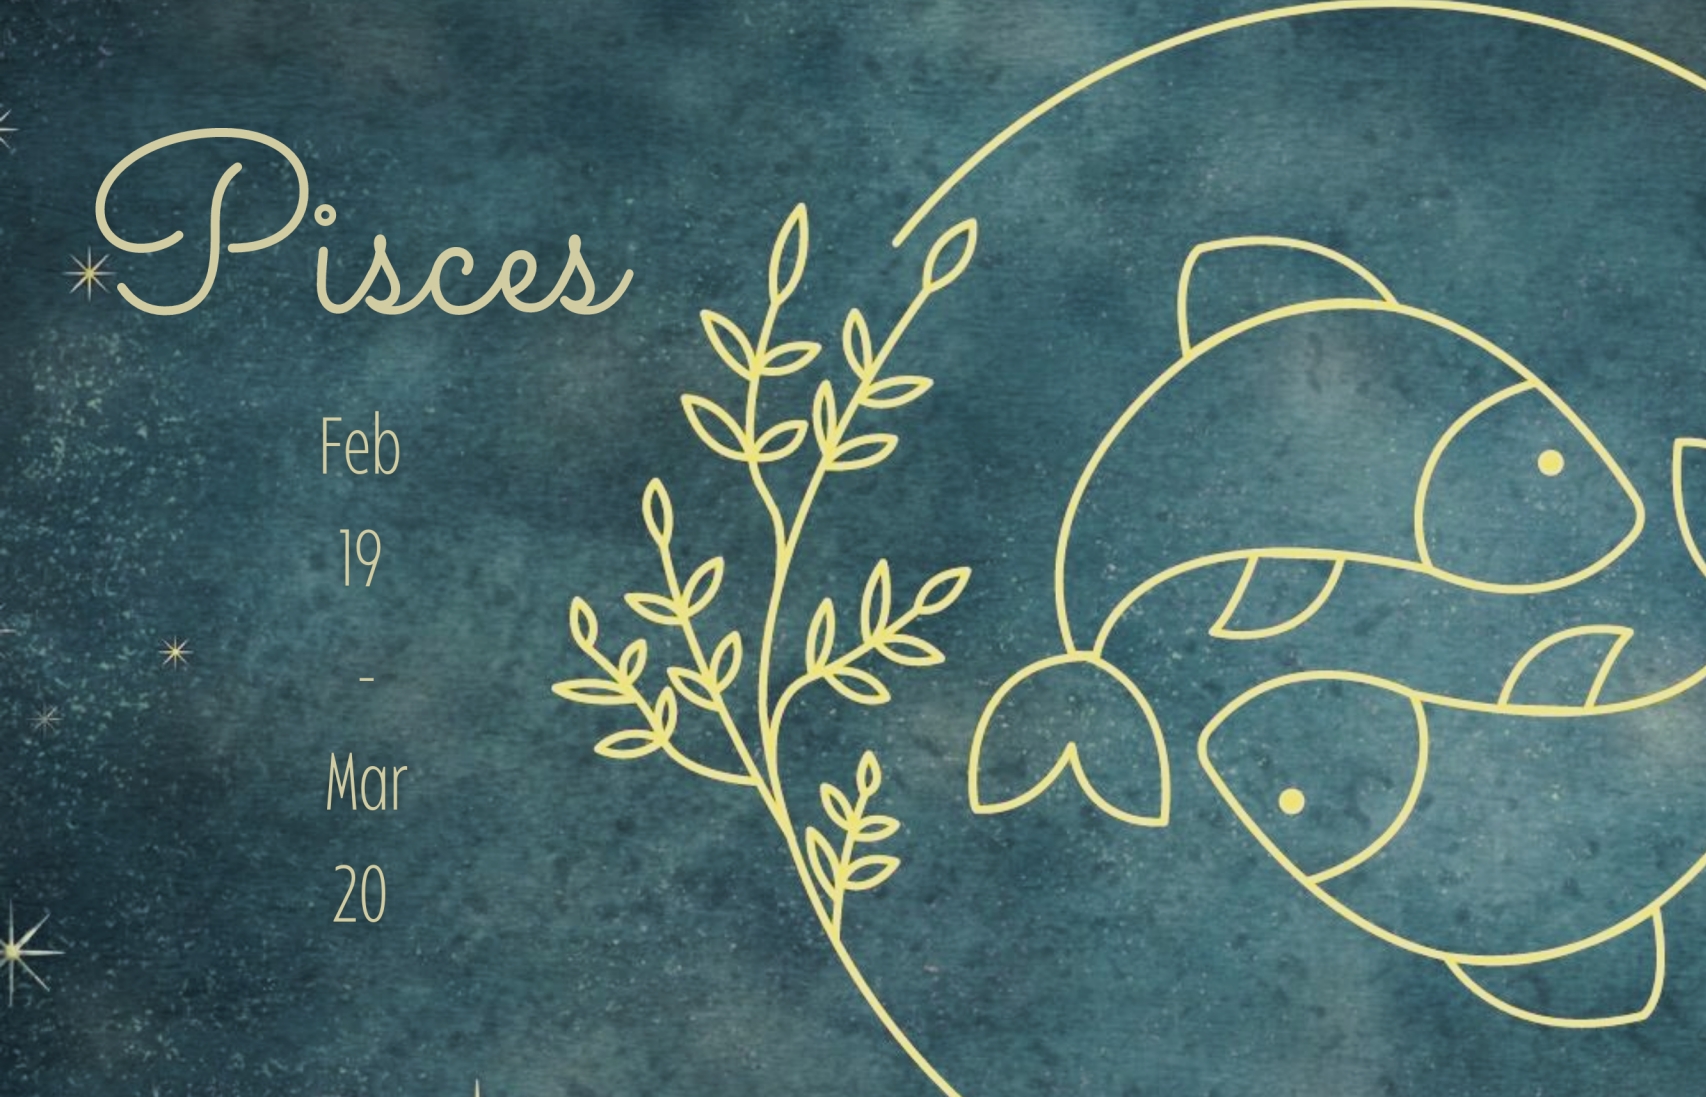 PISCES Zodiac Sign: Dates, Meaning and Personal Traits